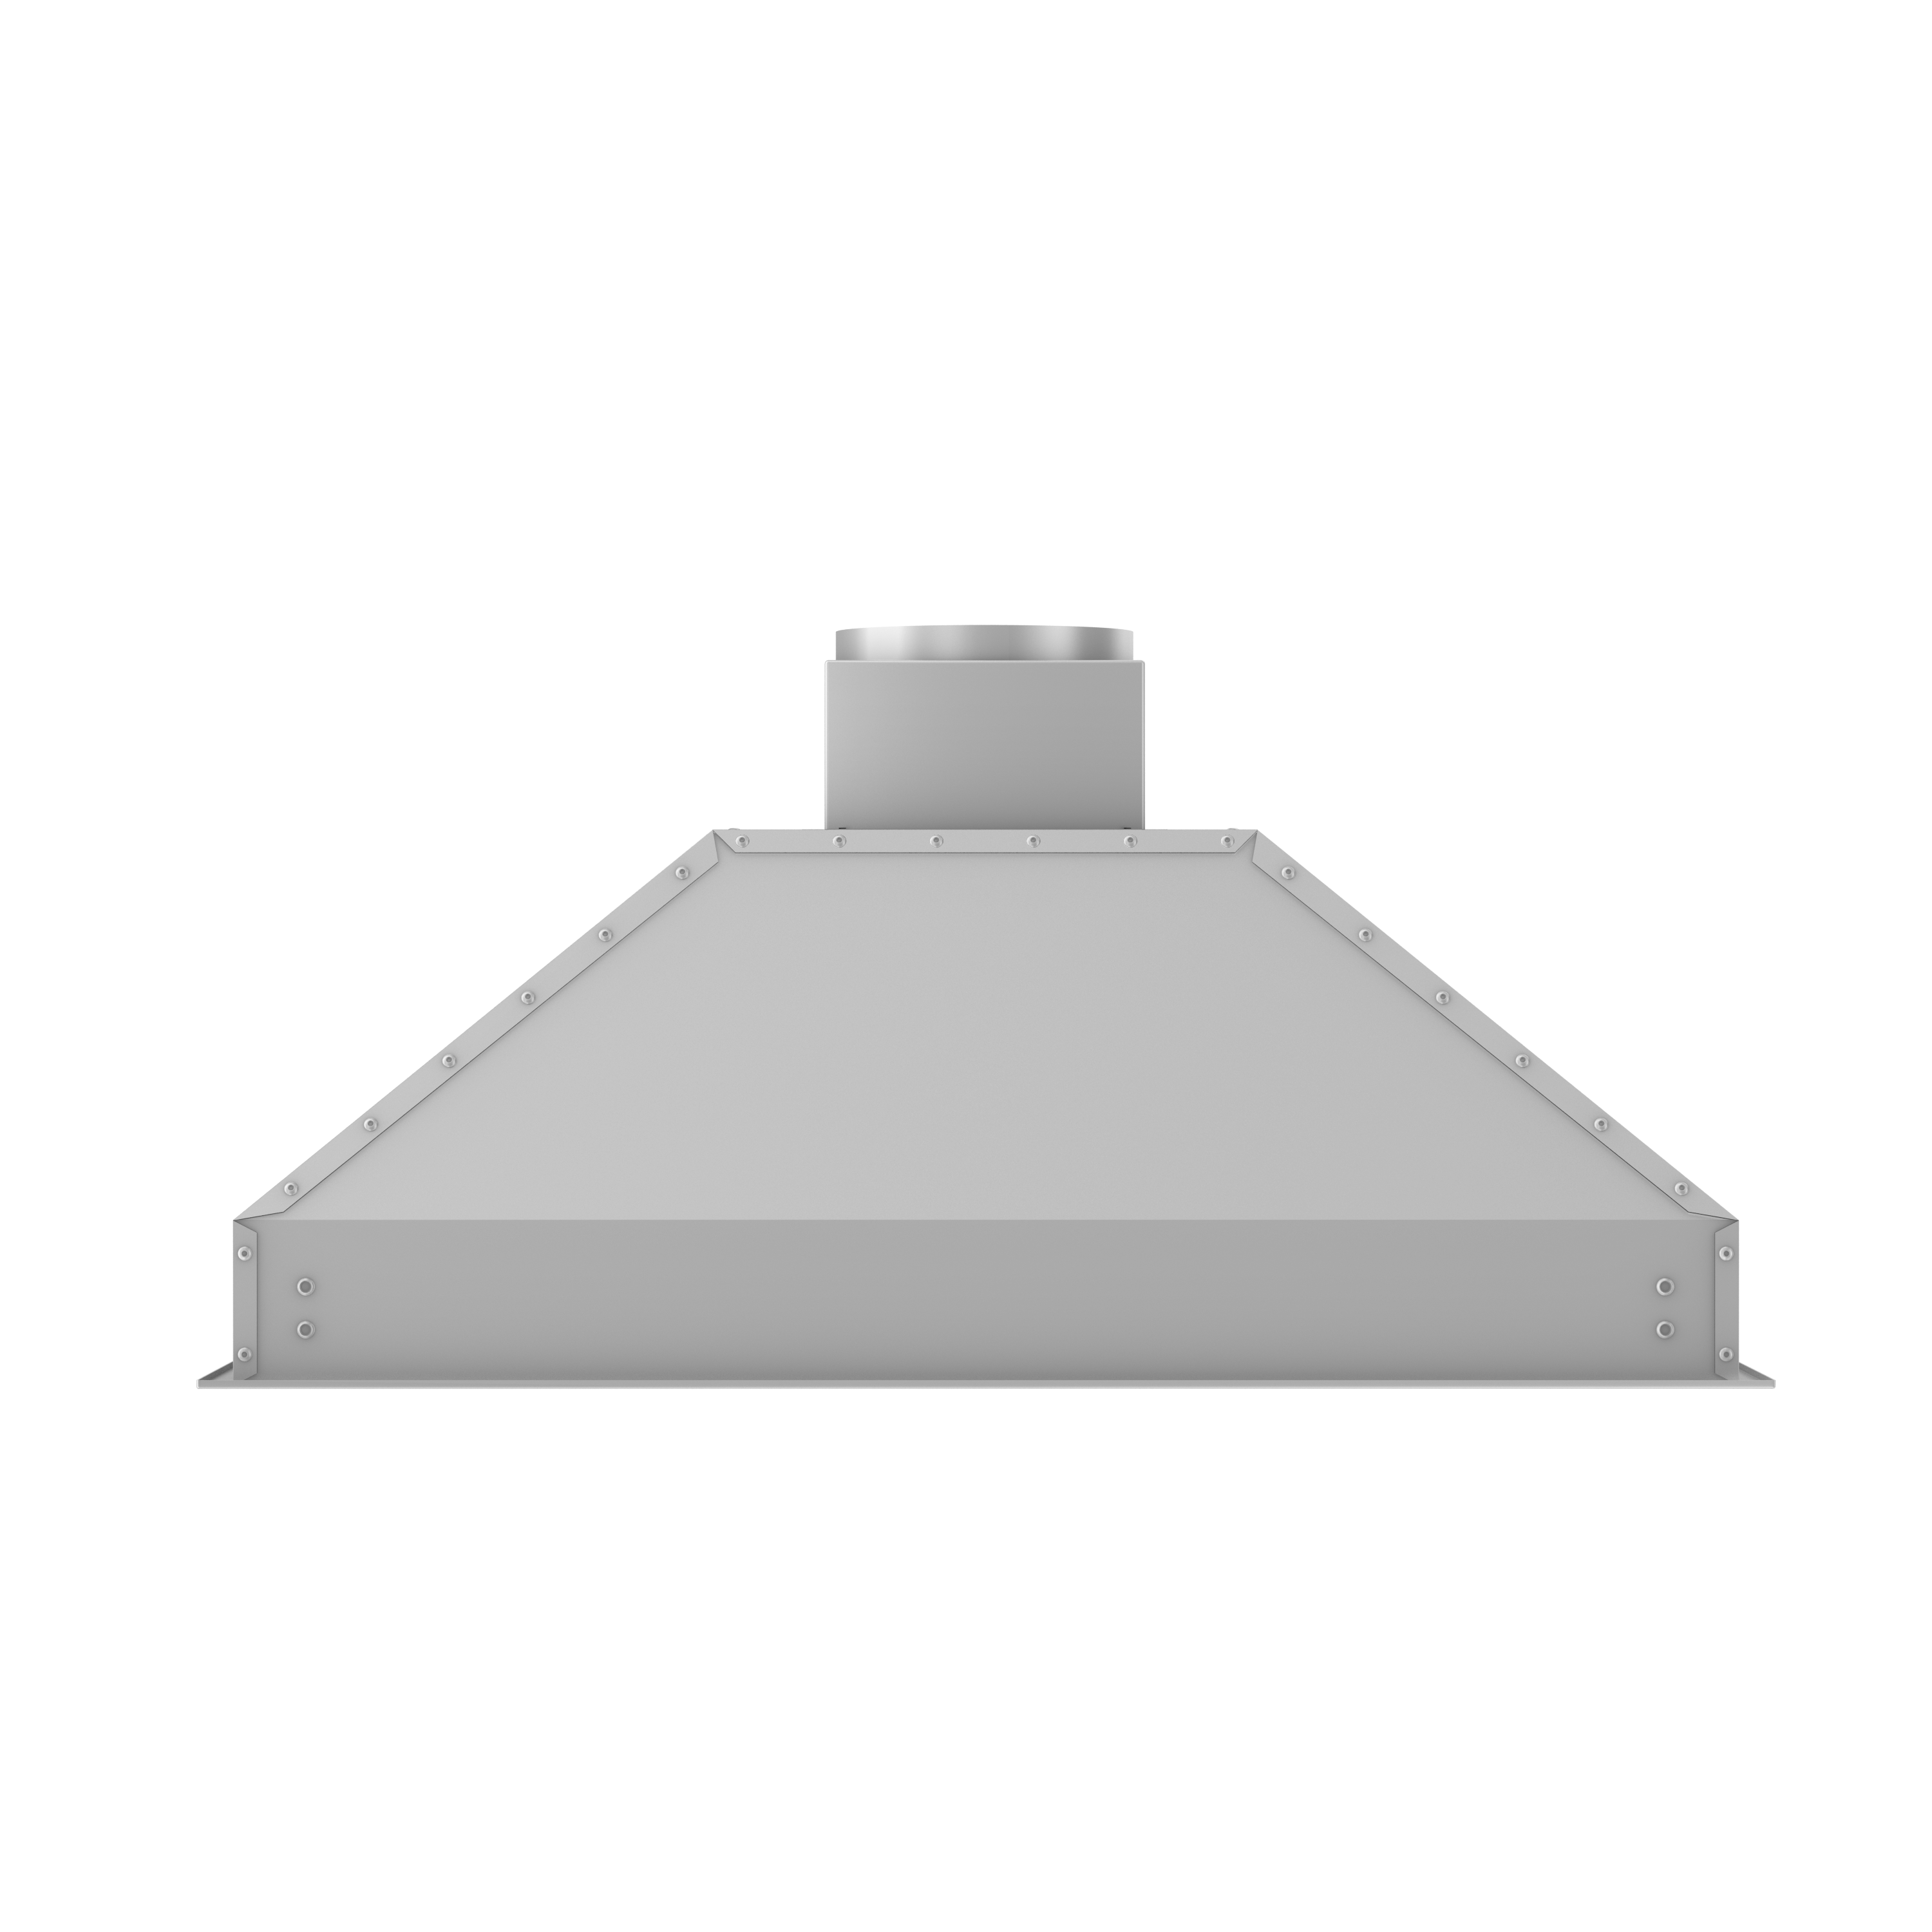 ZLINE 40" Ducted Remote Blower Range Hood Insert in Stainless Steel (698-RS-40-400)